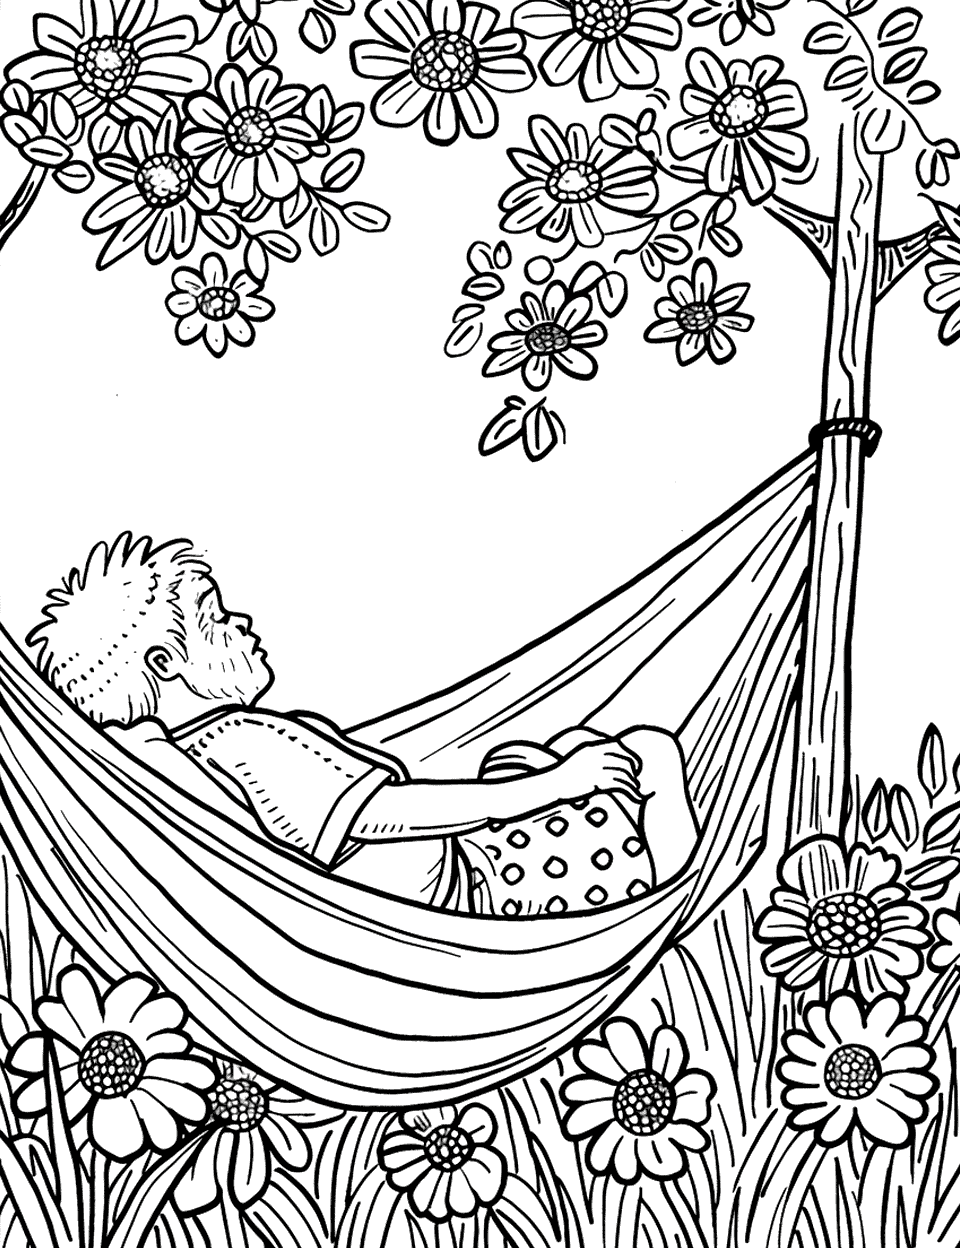 Relaxing in a Hammock Garden Coloring Page - An older person relaxing in a hammock strung between trees in a lush garden.